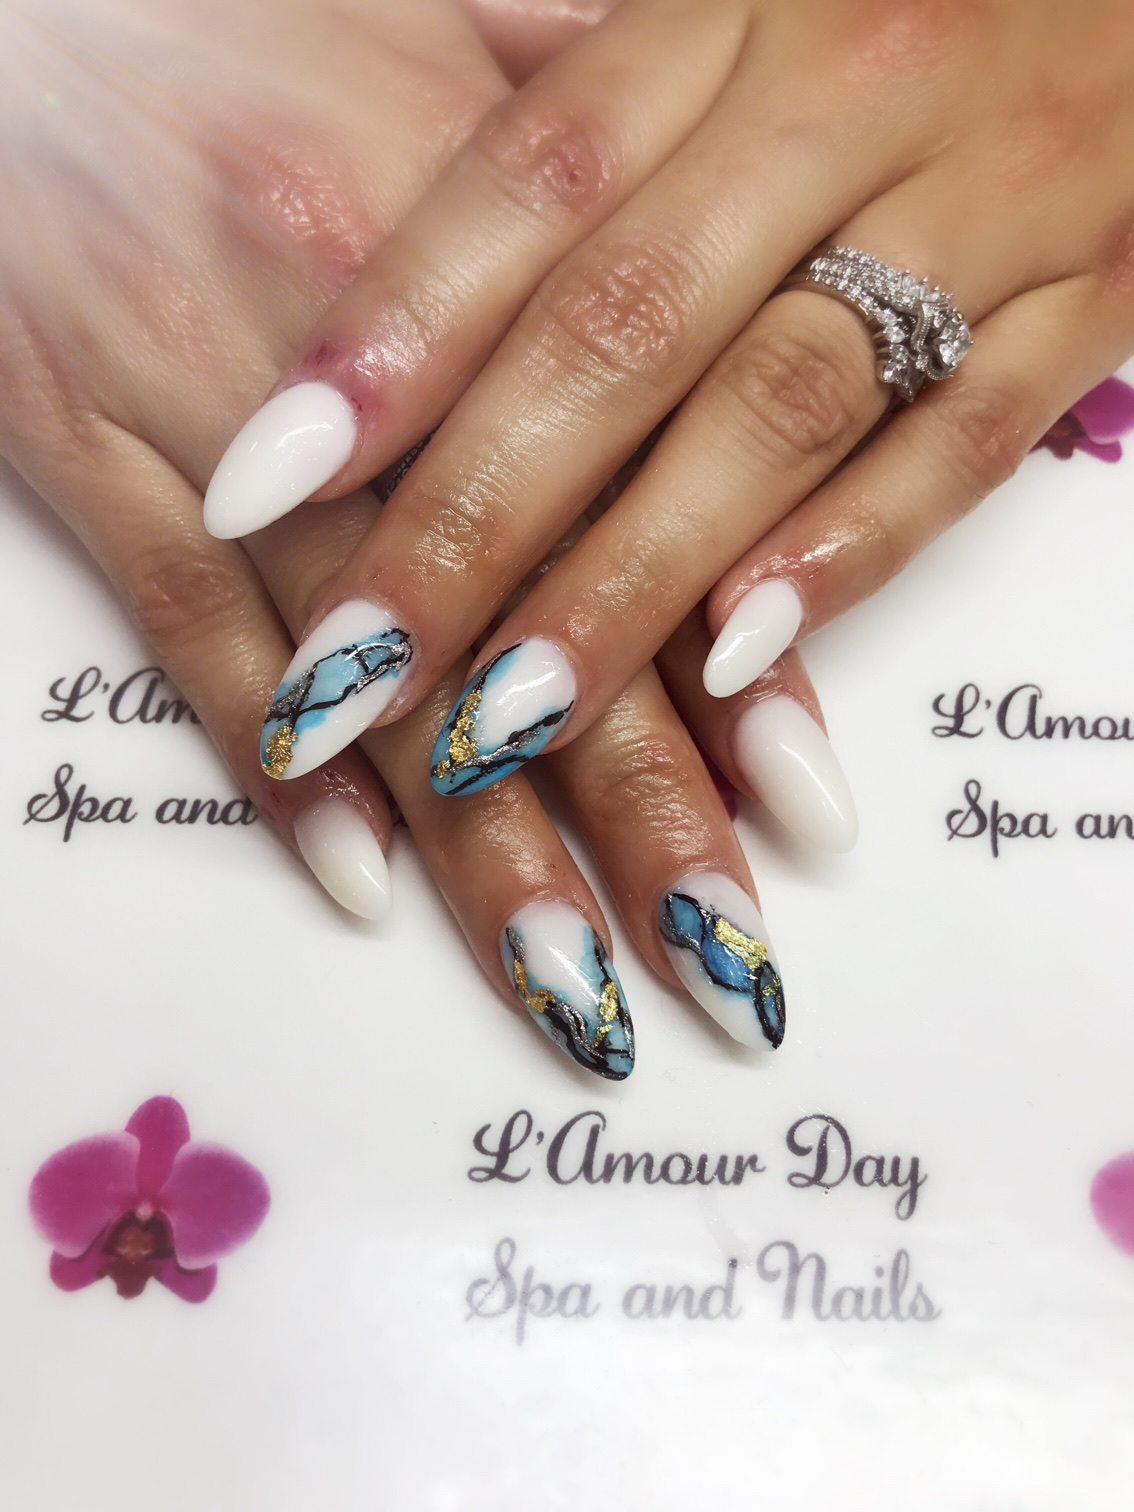 L'amour Nails - 10 Wairepo Street - Auckland | Fresha